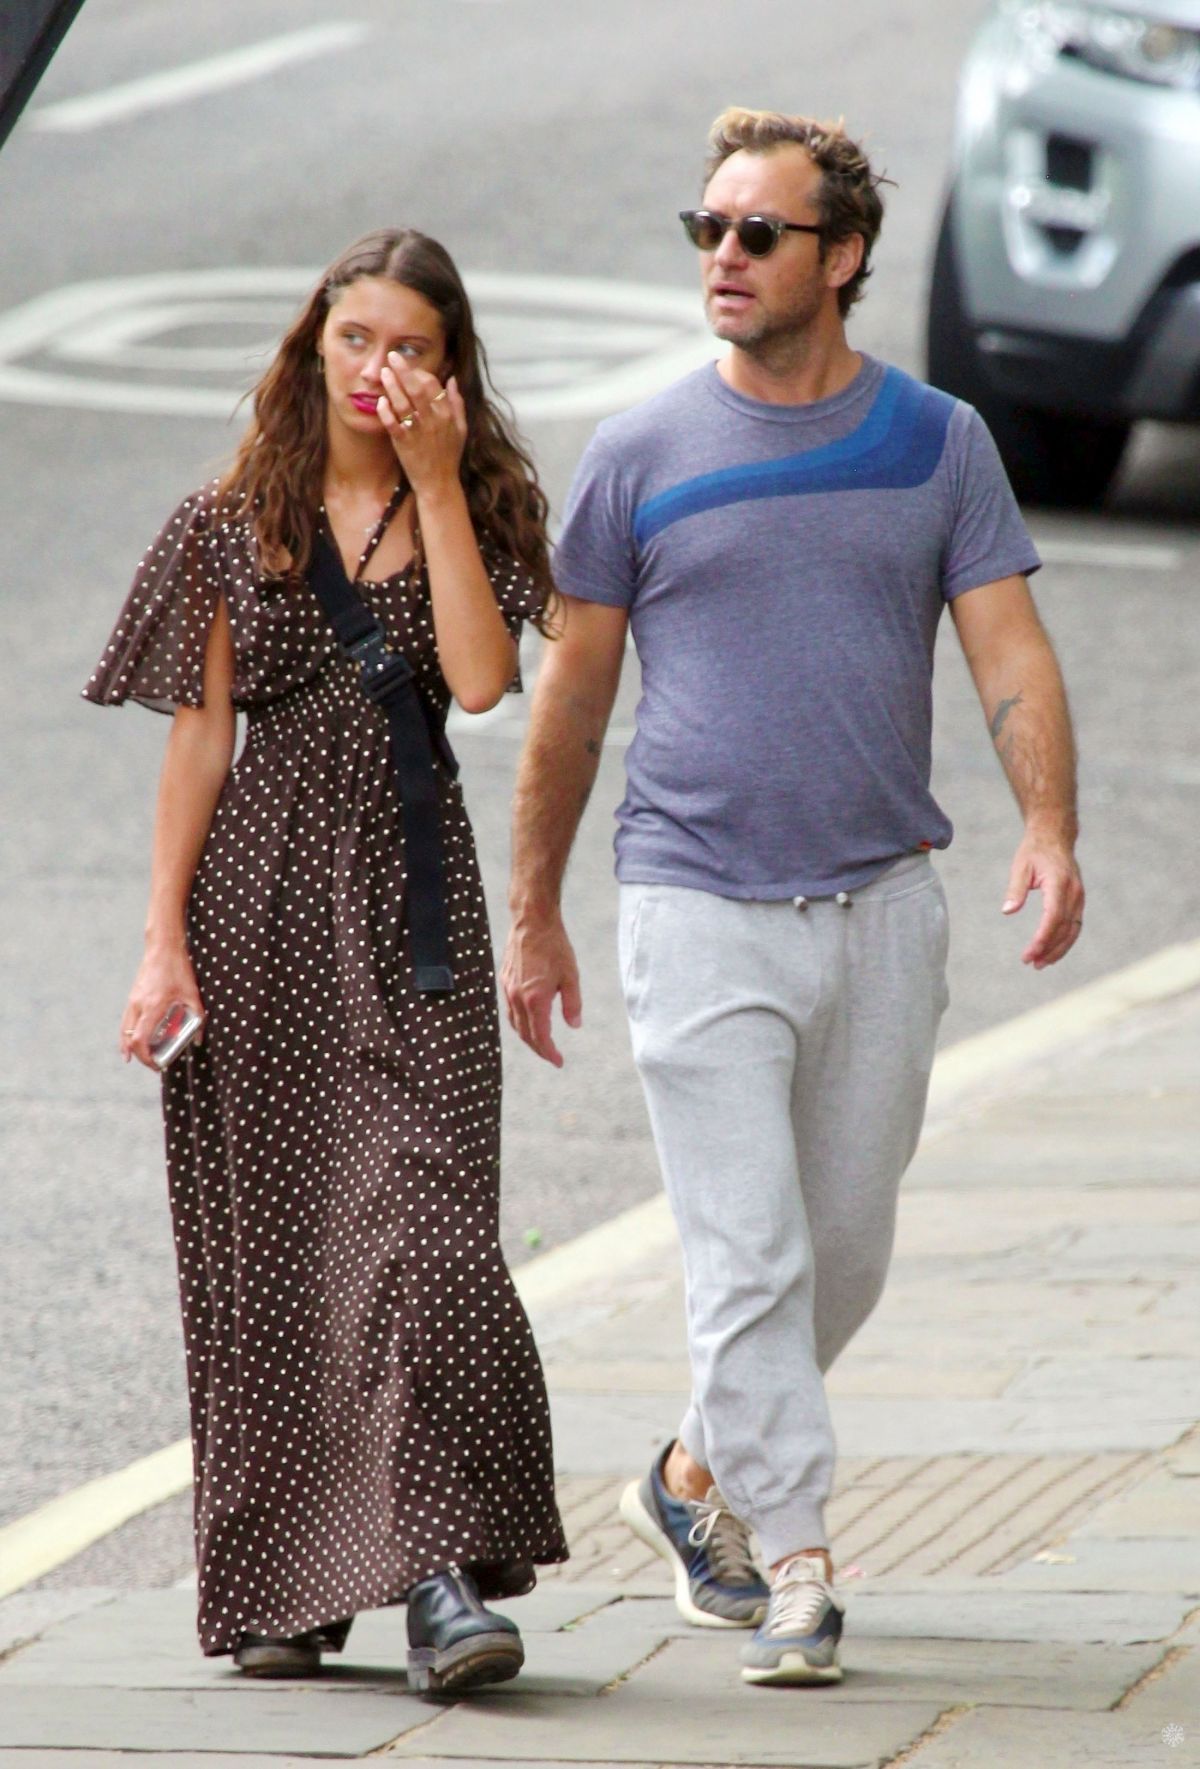 iris-and-jude-law-out-for-lunch-in-london-07-14-2019-4.jpg